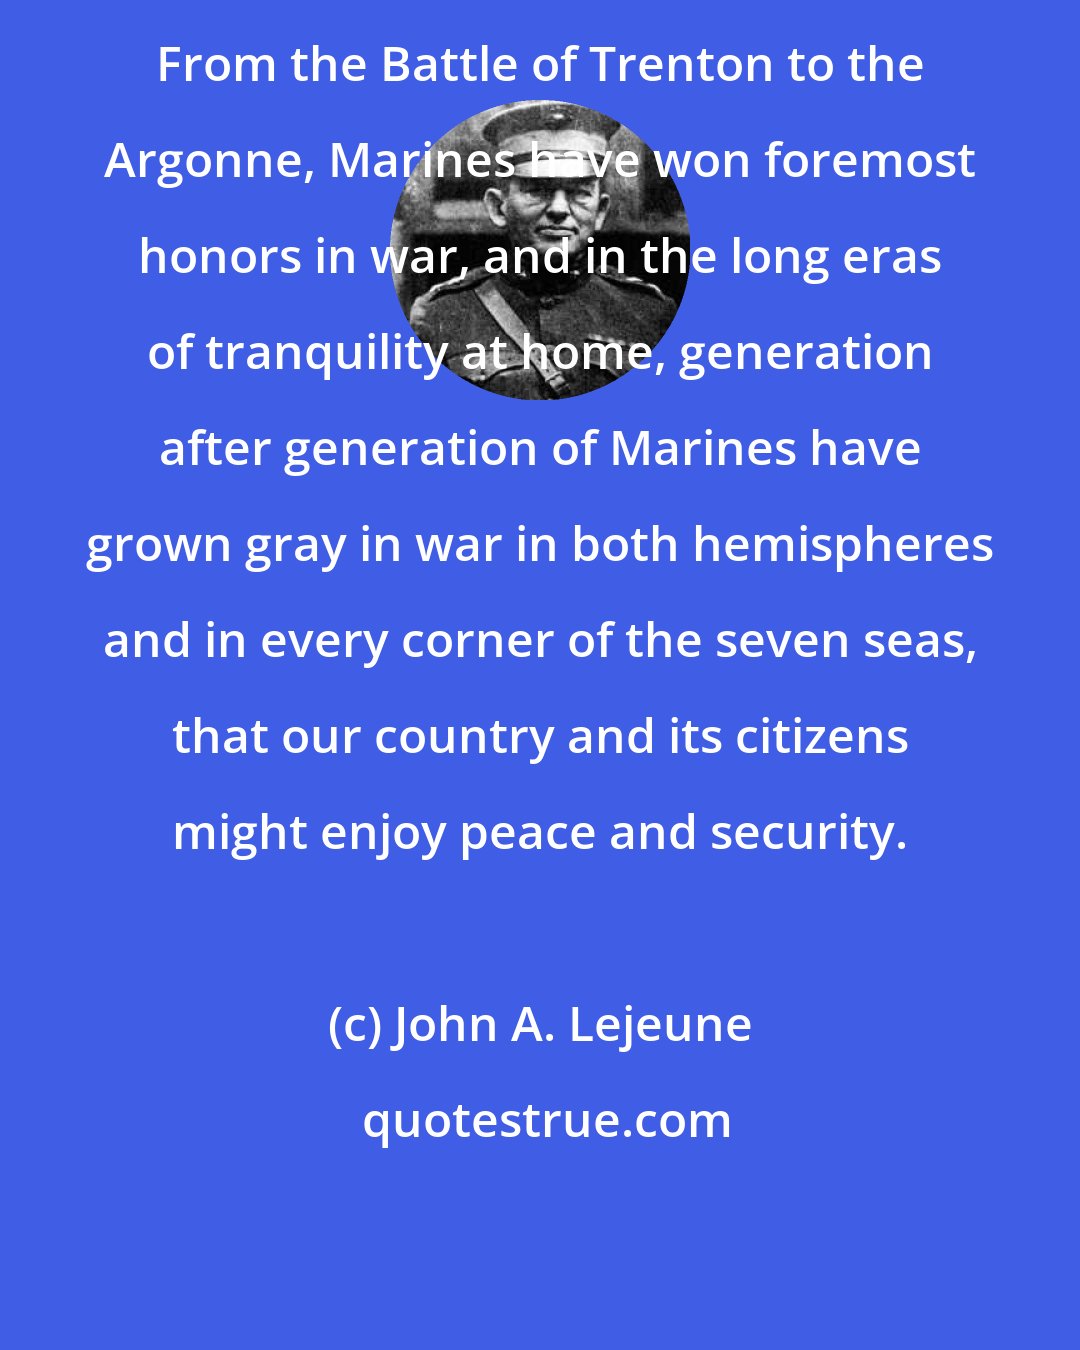 John A. Lejeune: From the Battle of Trenton to the Argonne, Marines have won foremost honors in war, and in the long eras of tranquility at home, generation after generation of Marines have grown gray in war in both hemispheres and in every corner of the seven seas, that our country and its citizens might enjoy peace and security.